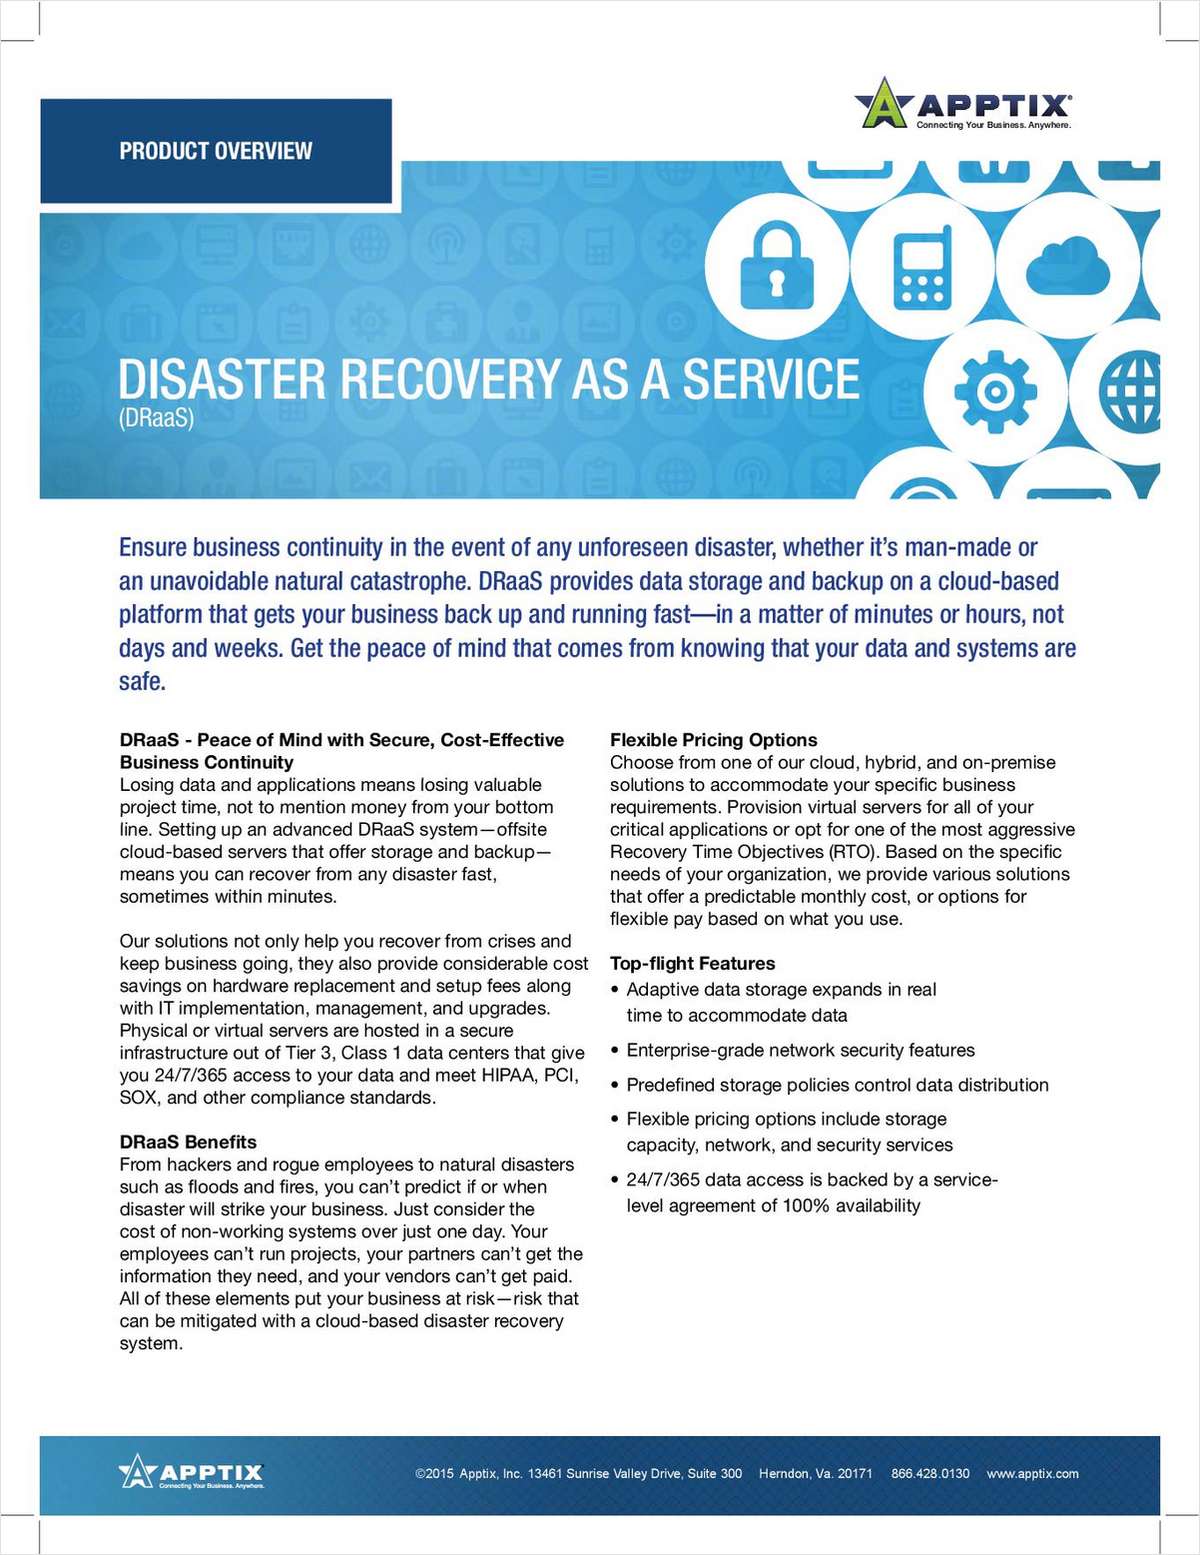 Disaster Recovery as a Service - Peace of Mind with Secure, Cost-Effective Business Continuity